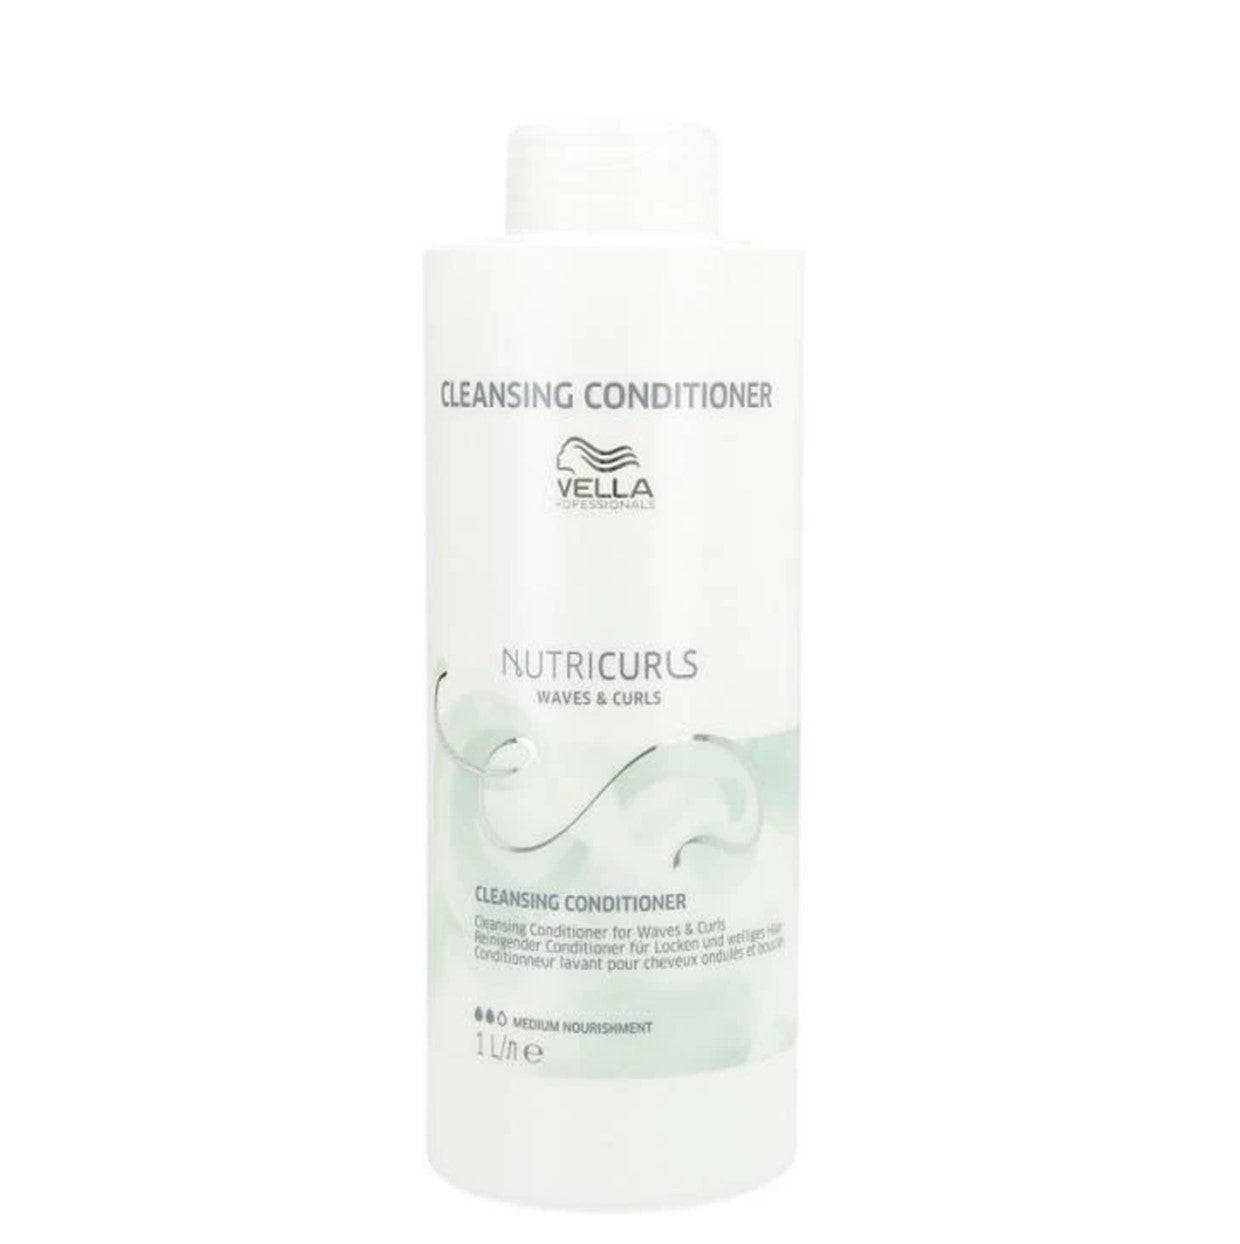 Wella Professionals Nutricurls Waves & Curls Cleansing Conditioner 1000ml - On Line Hair Depot